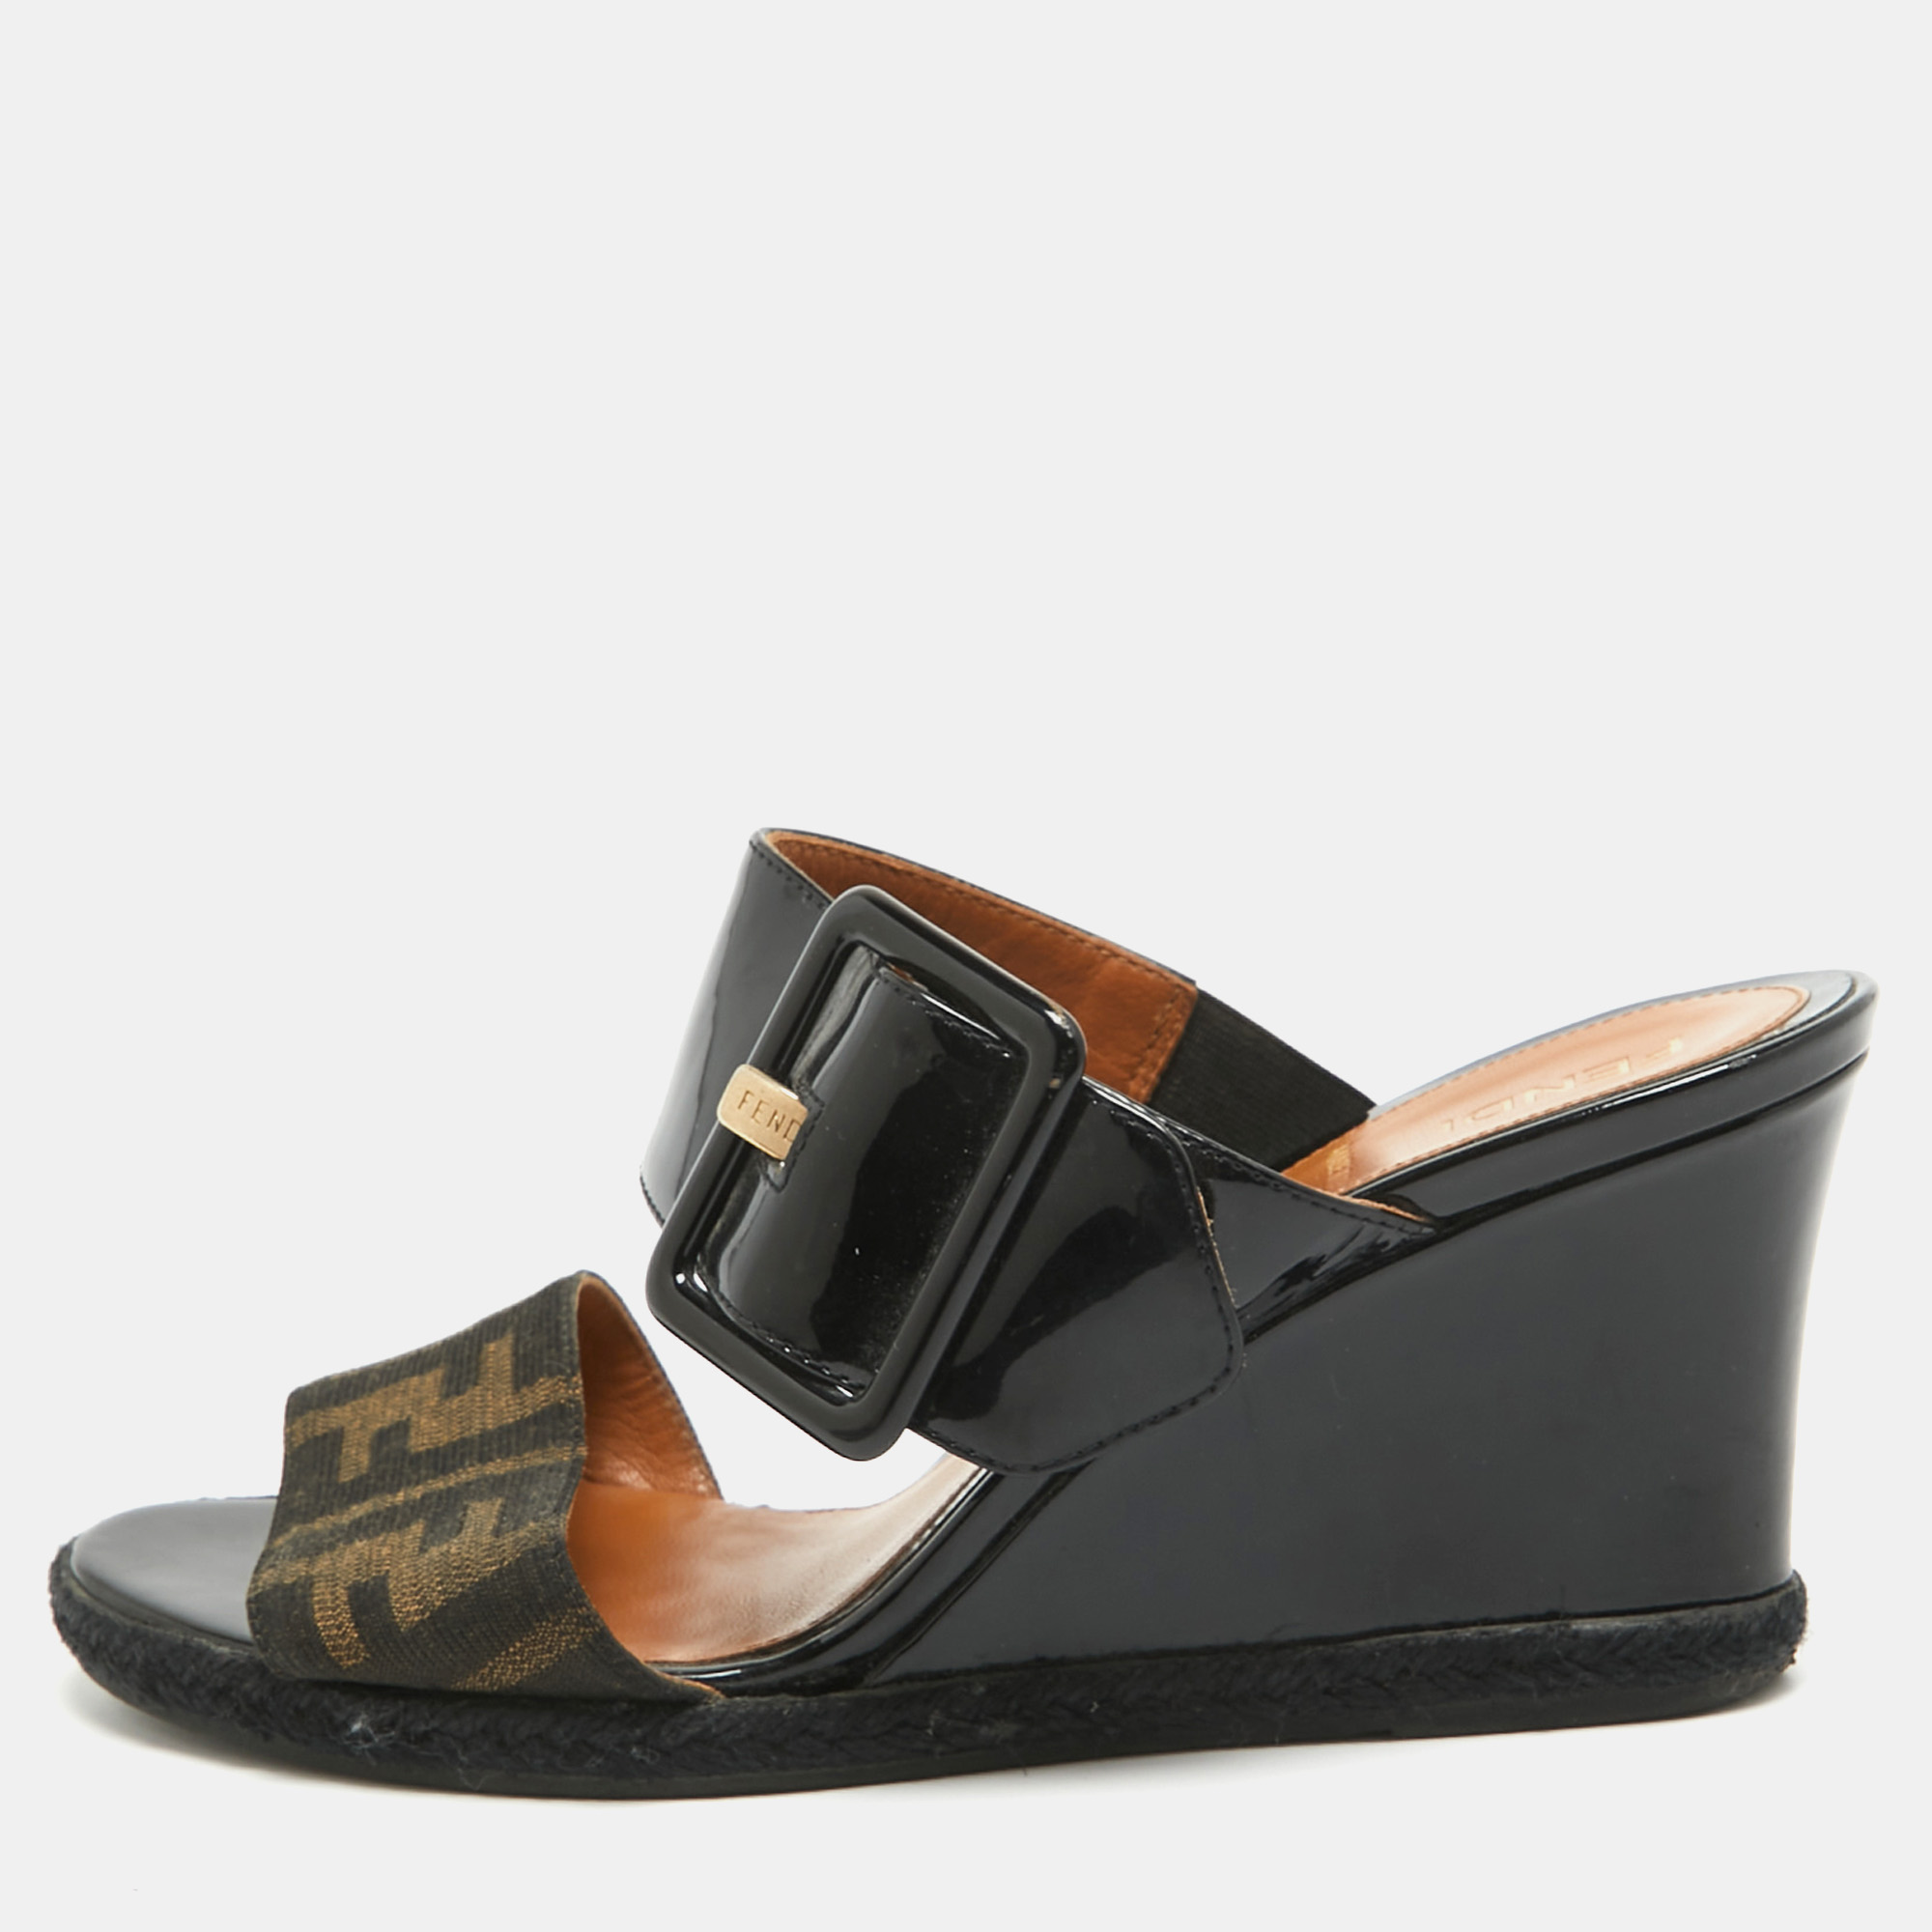 Fendi brown/black zucca canvas and patent leather wedge sandals size 35